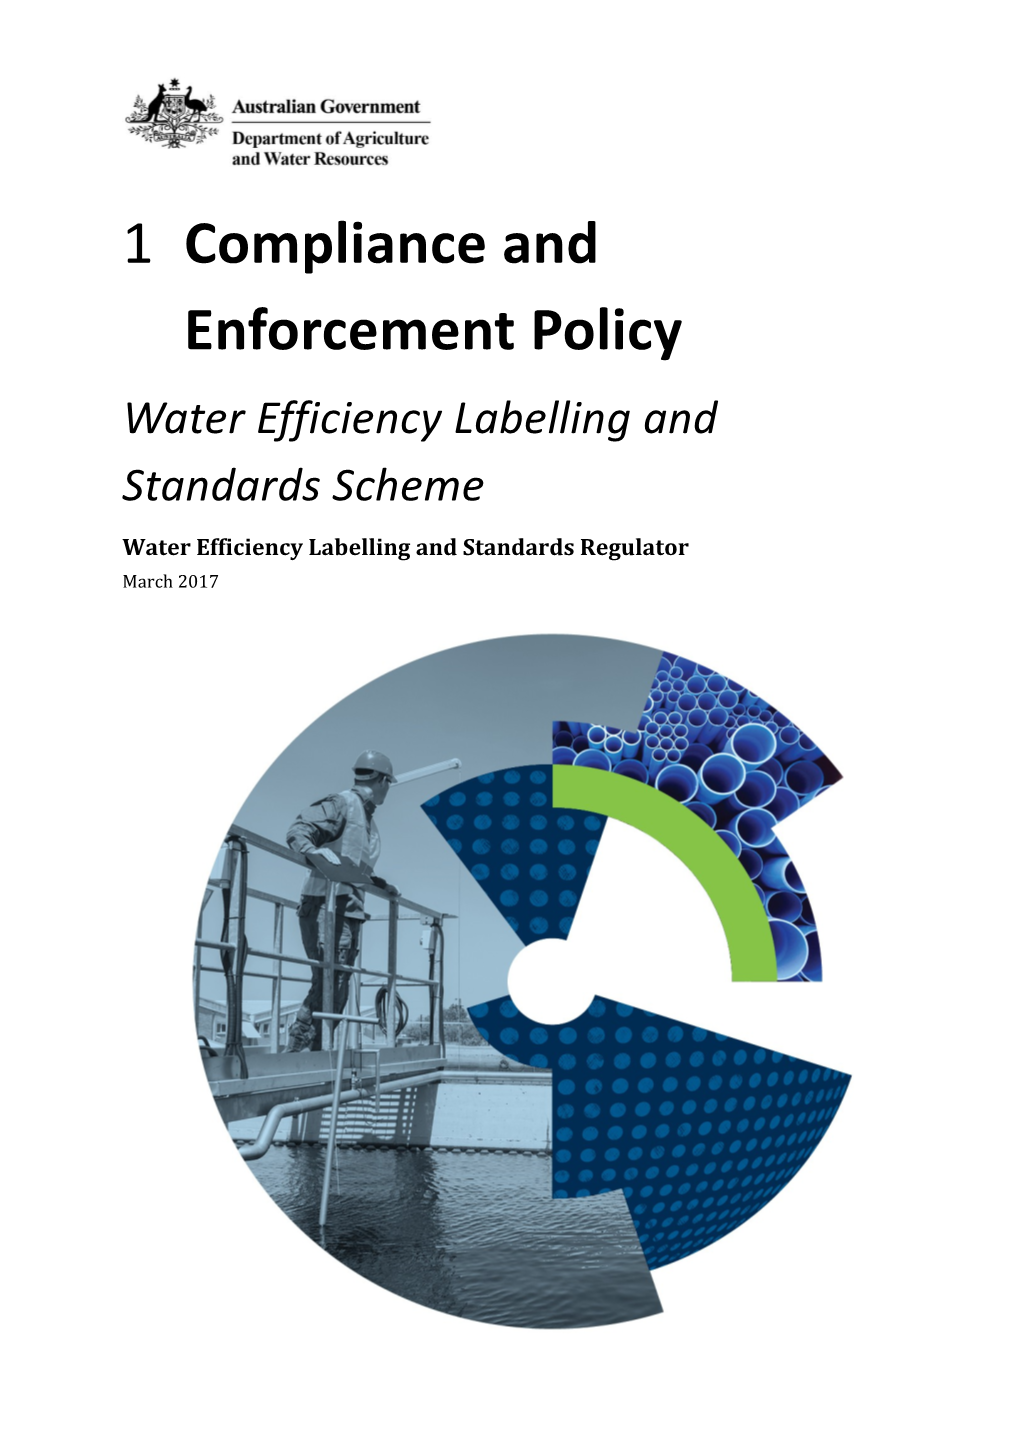 Compliance and Enforcement Policy: Water Efficiency Labelling and Standards Scheme